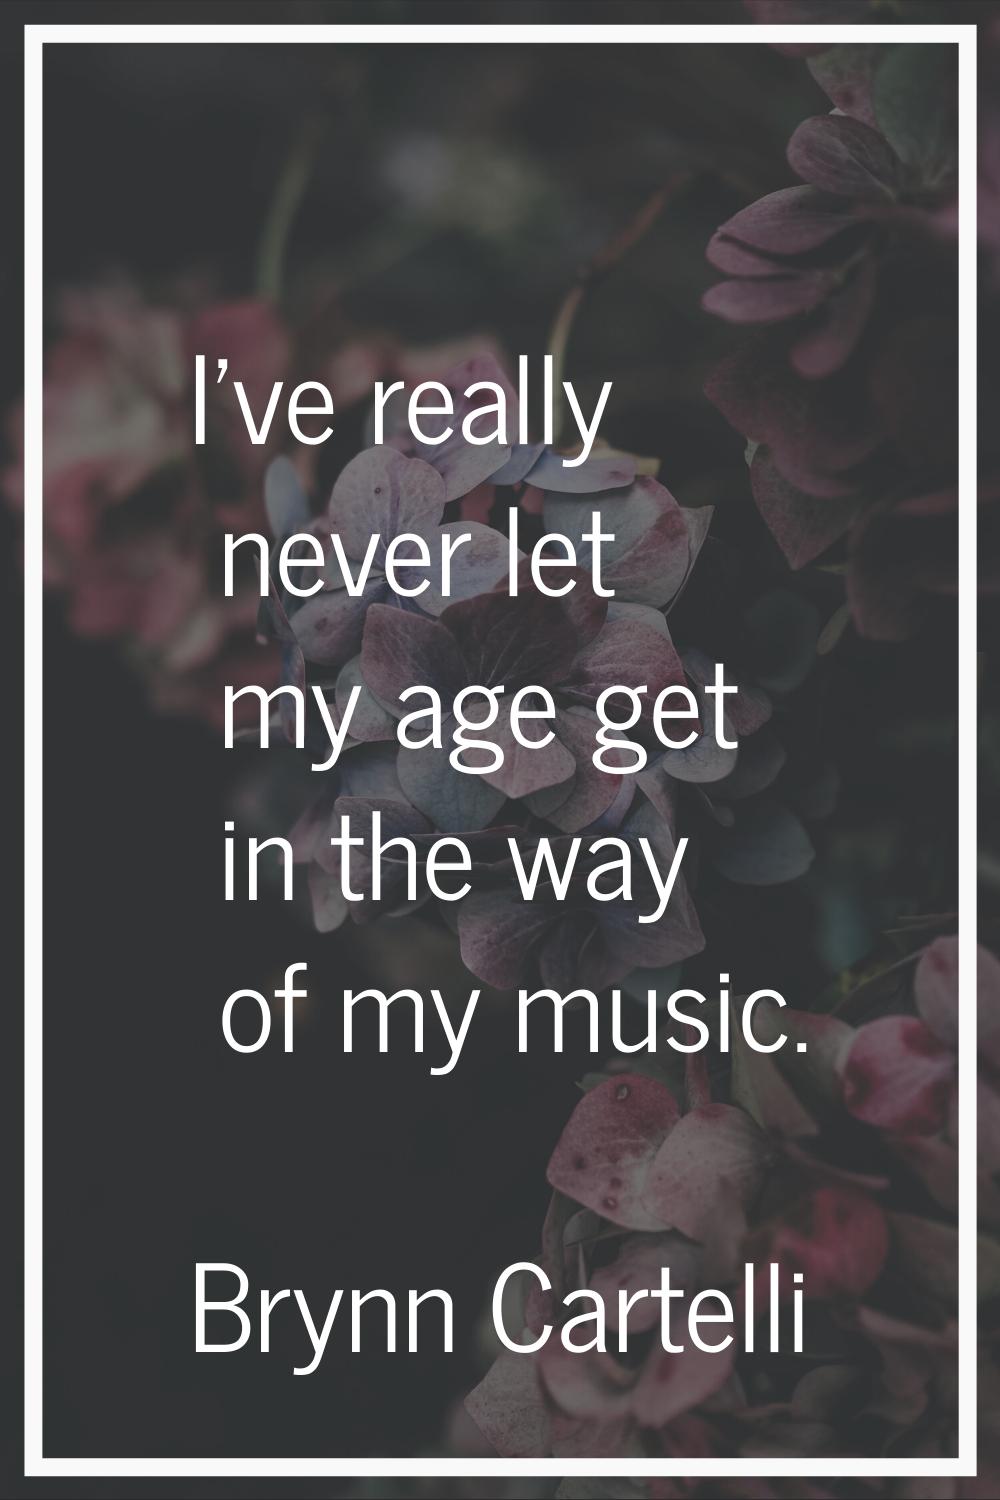 I've really never let my age get in the way of my music.